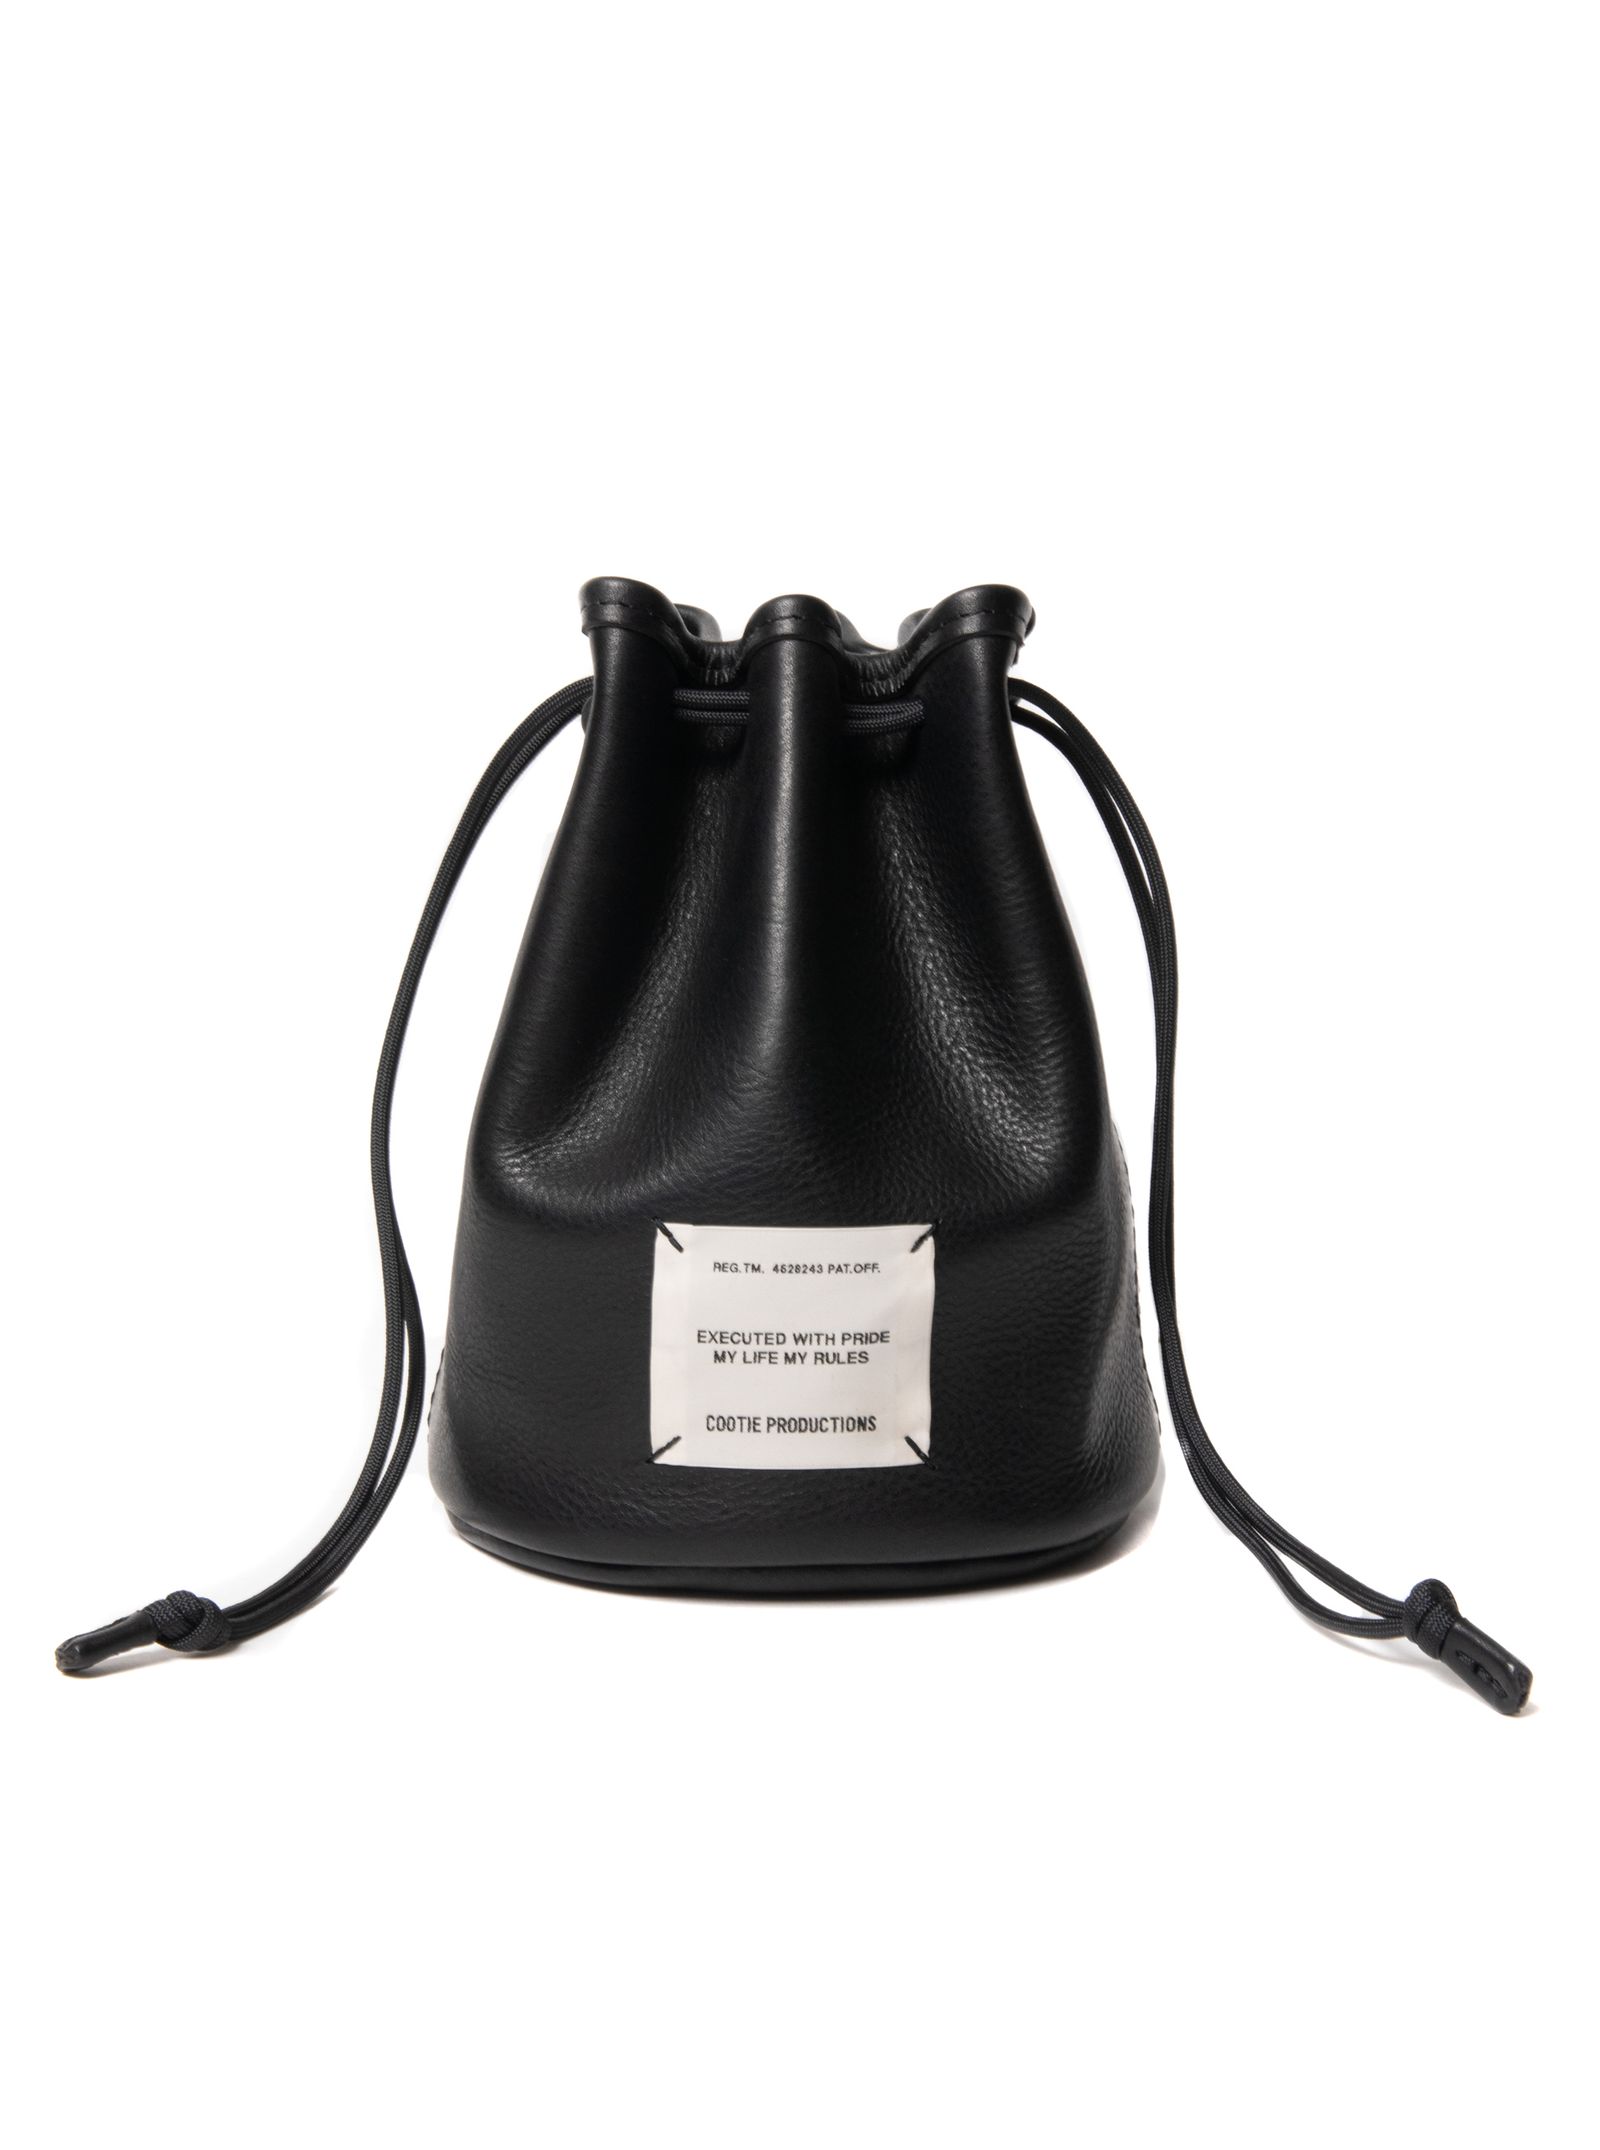 COOTIE PRODUCTIONS - Leather Bucket Bag (BLACK) / レザー 巾着 ...